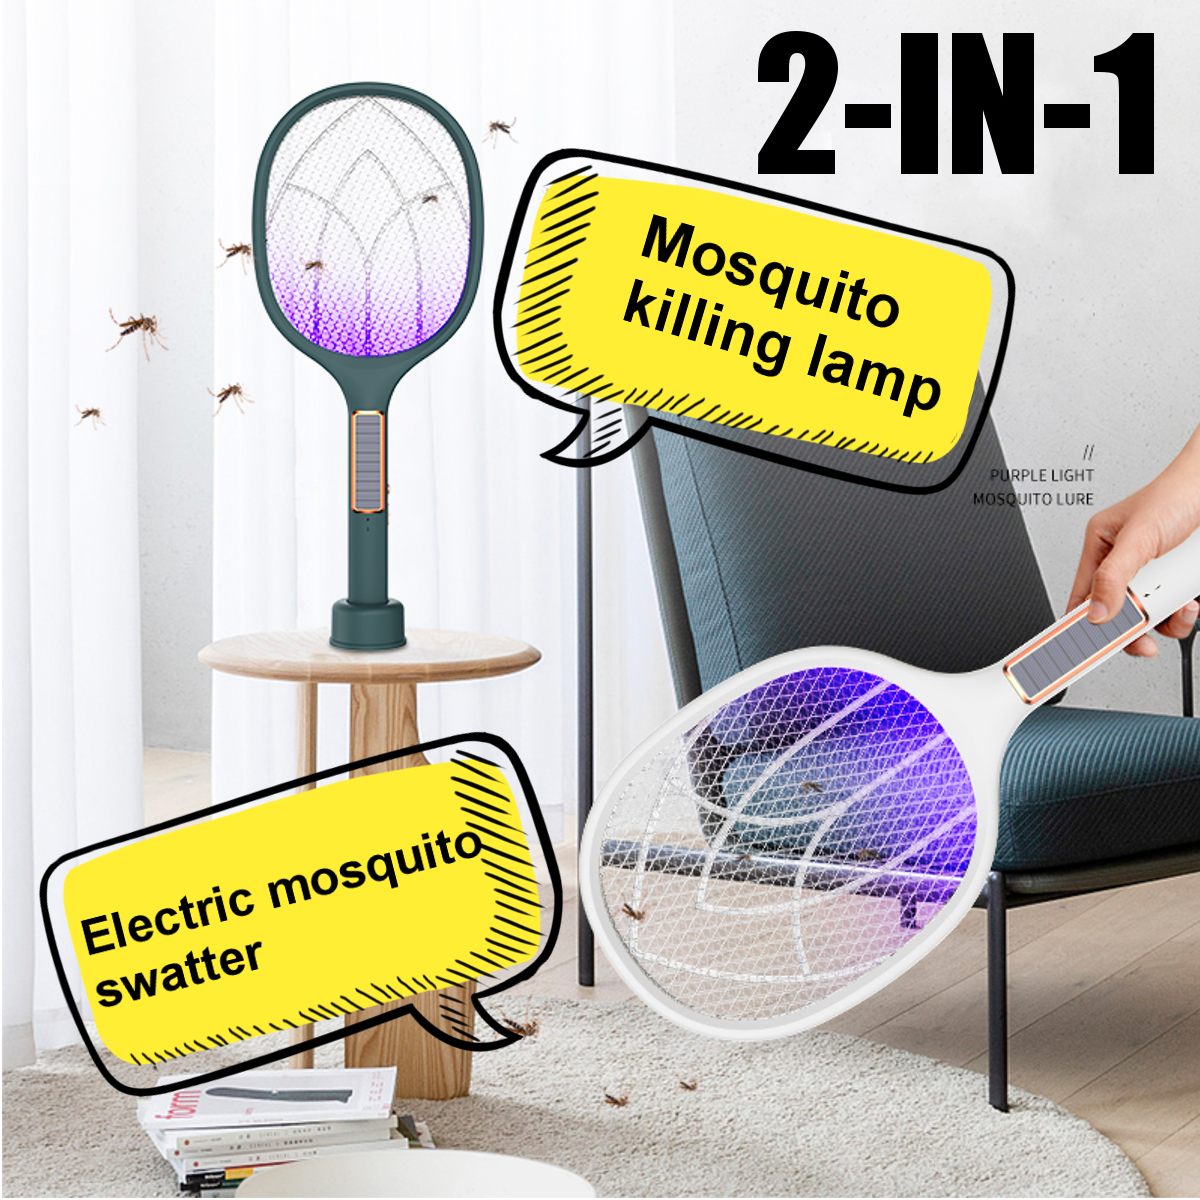 Solar-Charging-Three-in-one-Electric-Mosquito-Swatter-Motor-Mosquito-Trap--Mosquito-Lamp-USB-Plug-1841829-3